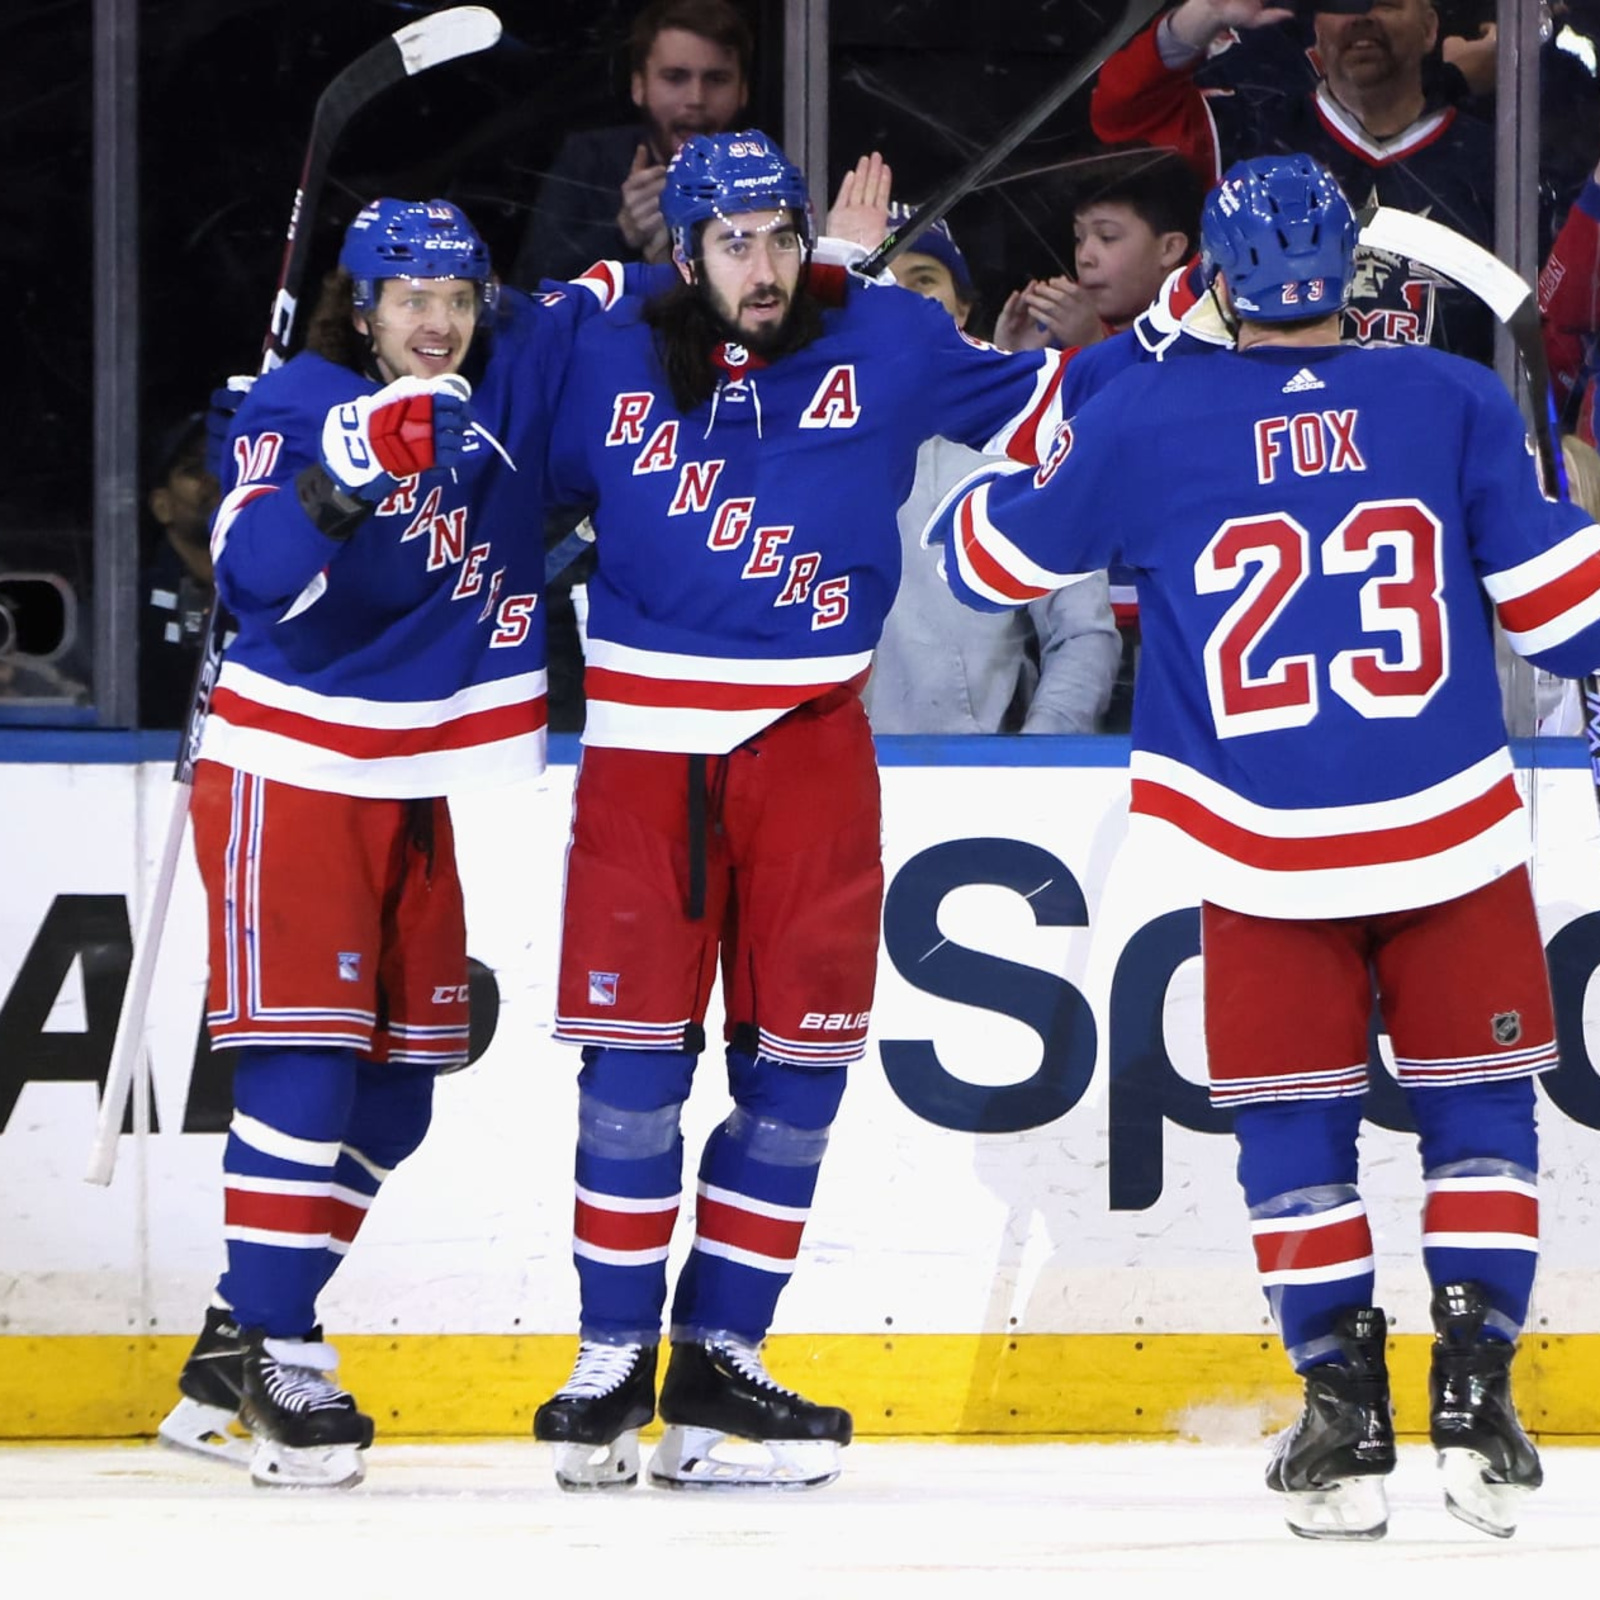 New York Rangers free agents: Martin St. Louis won't be re-signed